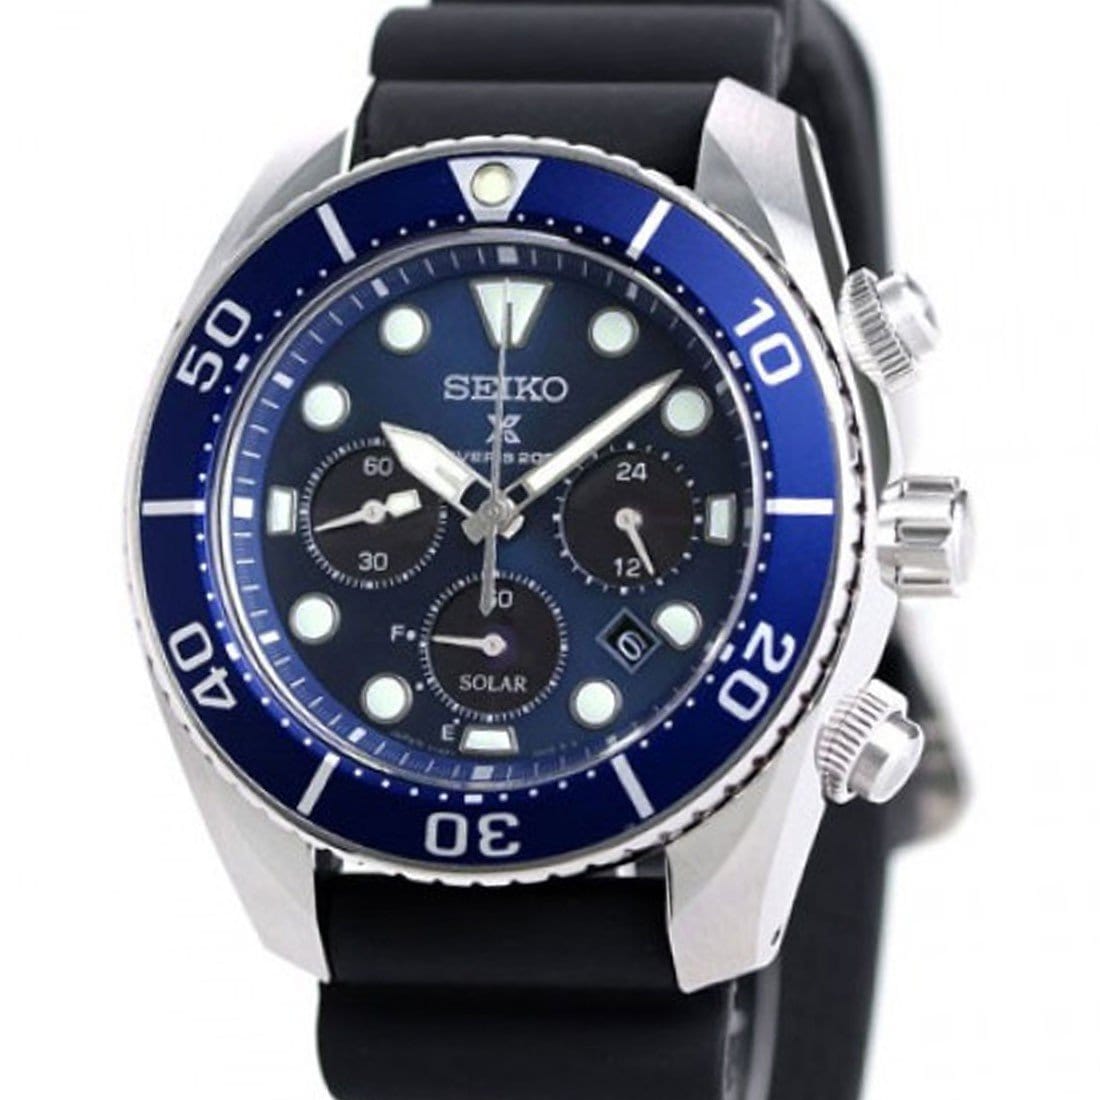 SBDL063 Seiko Prospex Solar Powered Male Divers Watch (BACKORDER)